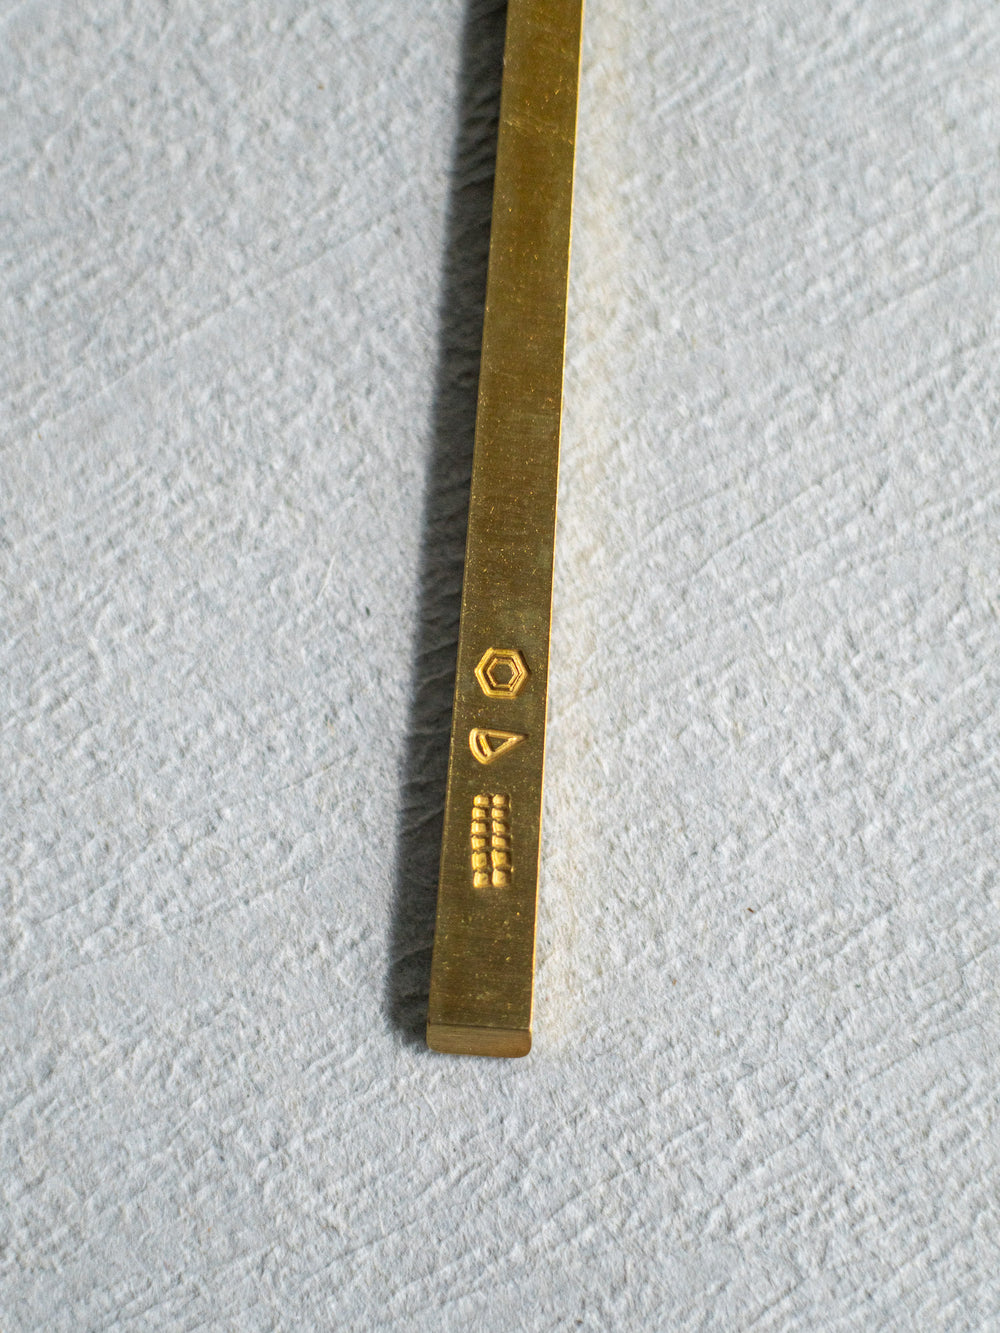 Close up view of the stamp on the brass handle of Azmaya's small fork